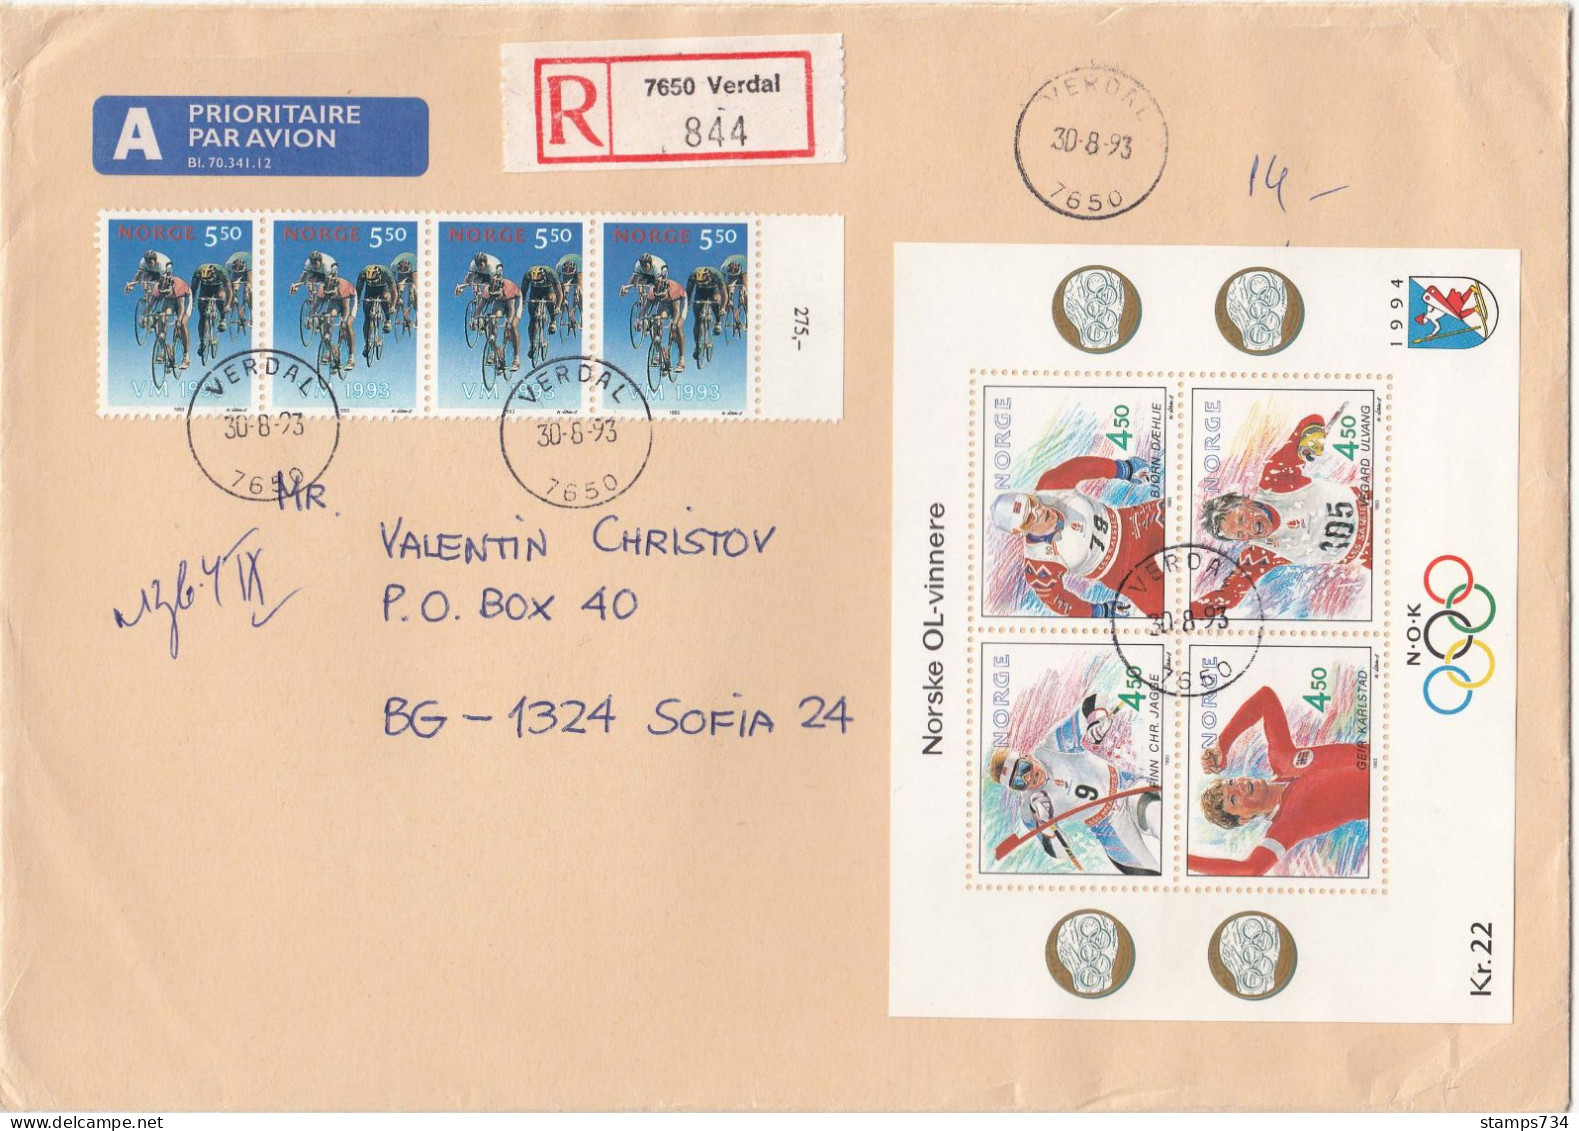 Norway 1993 - Olympic Games Lilehammer'94-s/sh,Cycling VM-4 Stamps, Letter Registred+priority From Verdal To Sofia - Briefe U. Dokumente